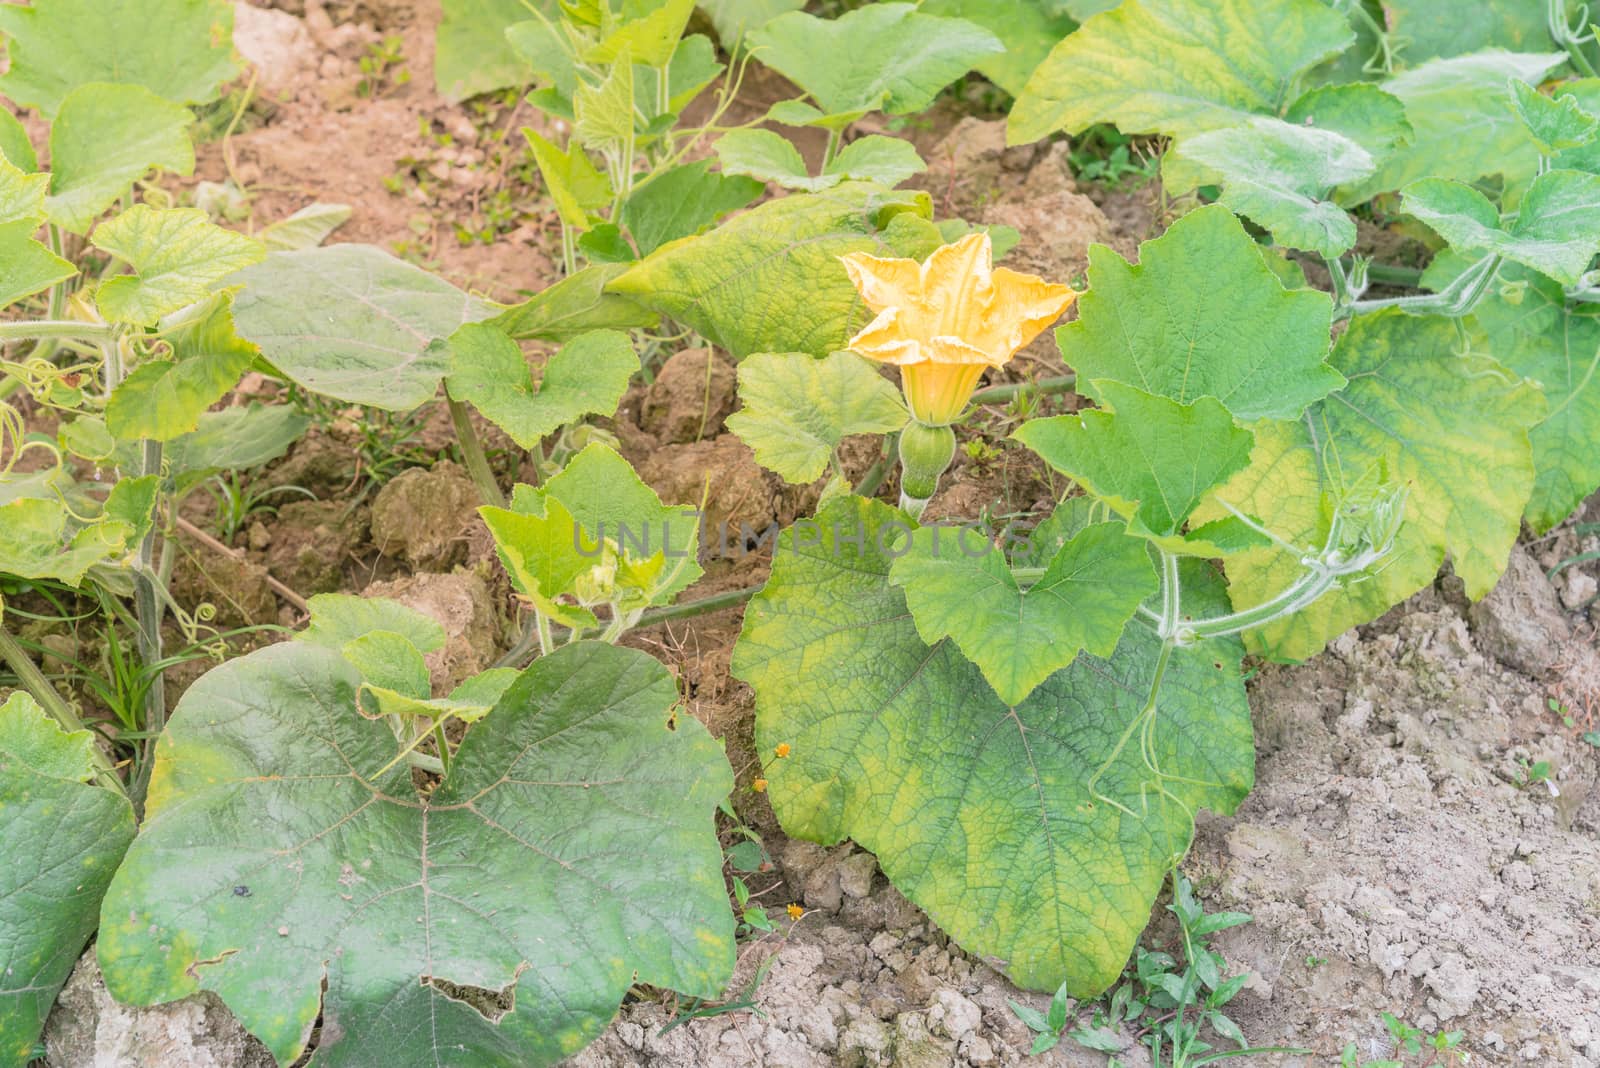 Top view a pumpkin farm in the North Vietnam with yellow squash flower and young fruit. Strong green pumpkin vine growing on clay soil with weed. Agriculture background.